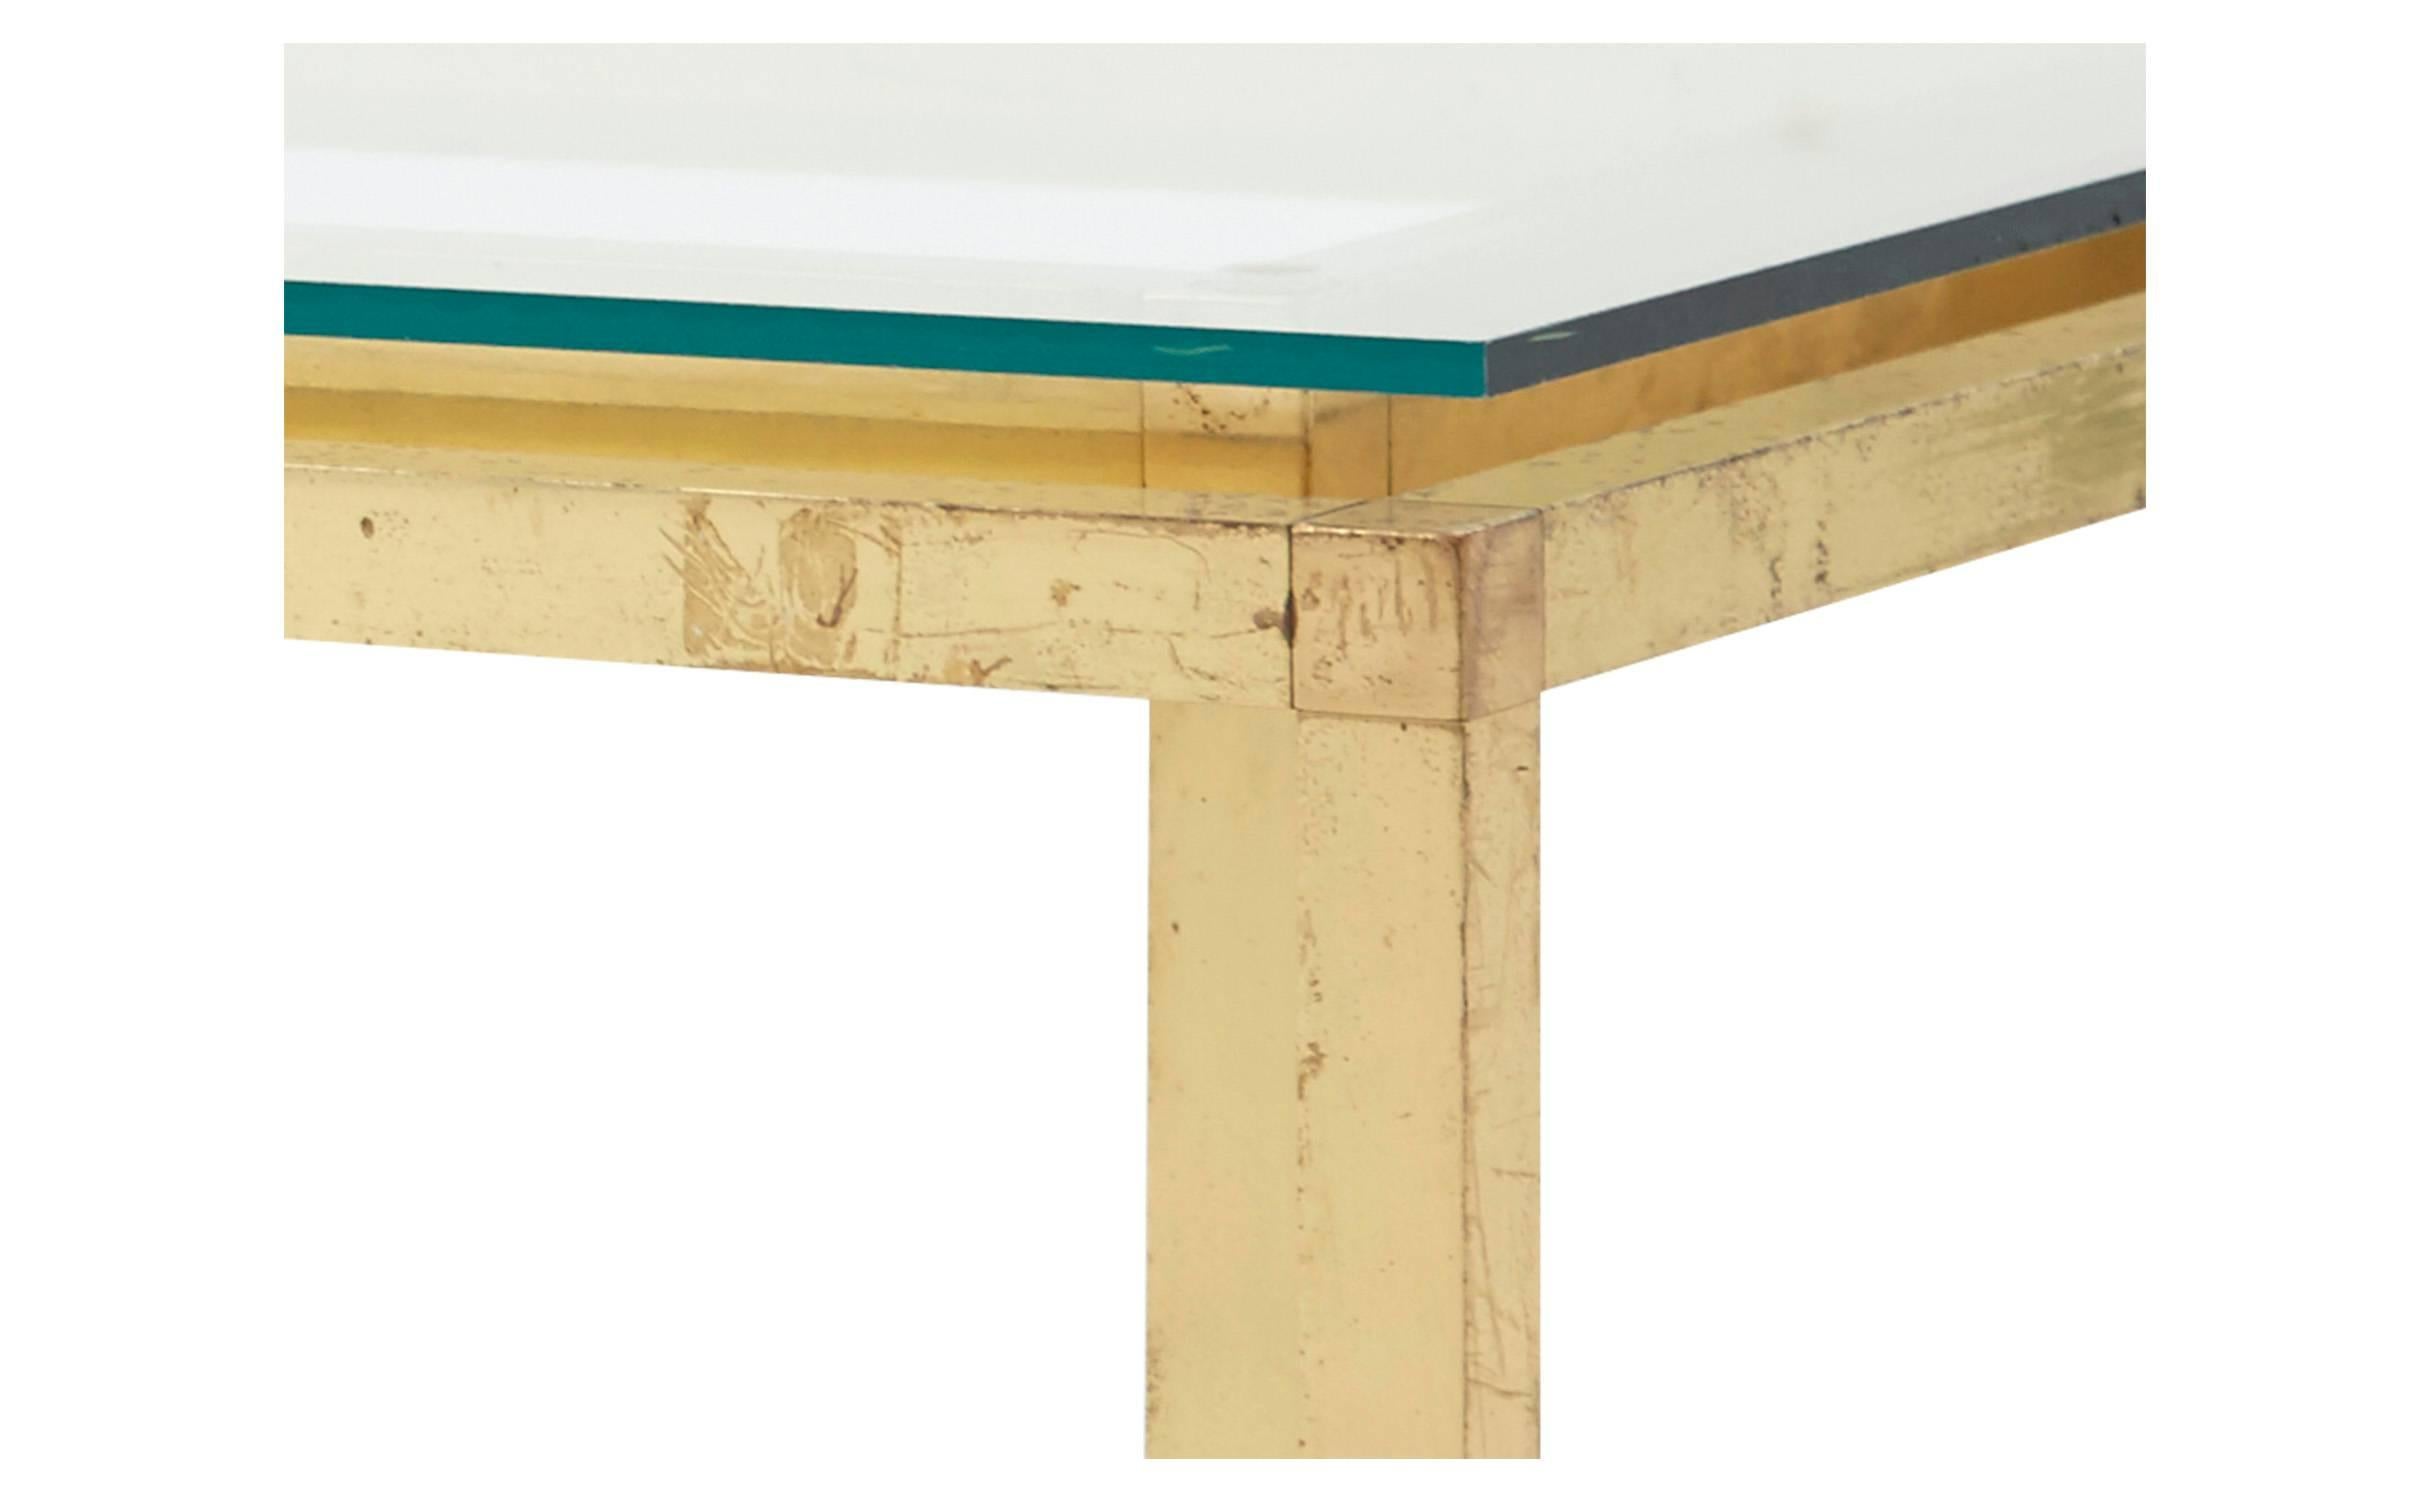 Founded in the late 1940s, Mastercraft Furniture brought sophisticated, European-inspired design to America throughout the mid-20th century. Found in France, our Vintage Brass Coffee Table pairs a rectangular glass top with an angular brass base.